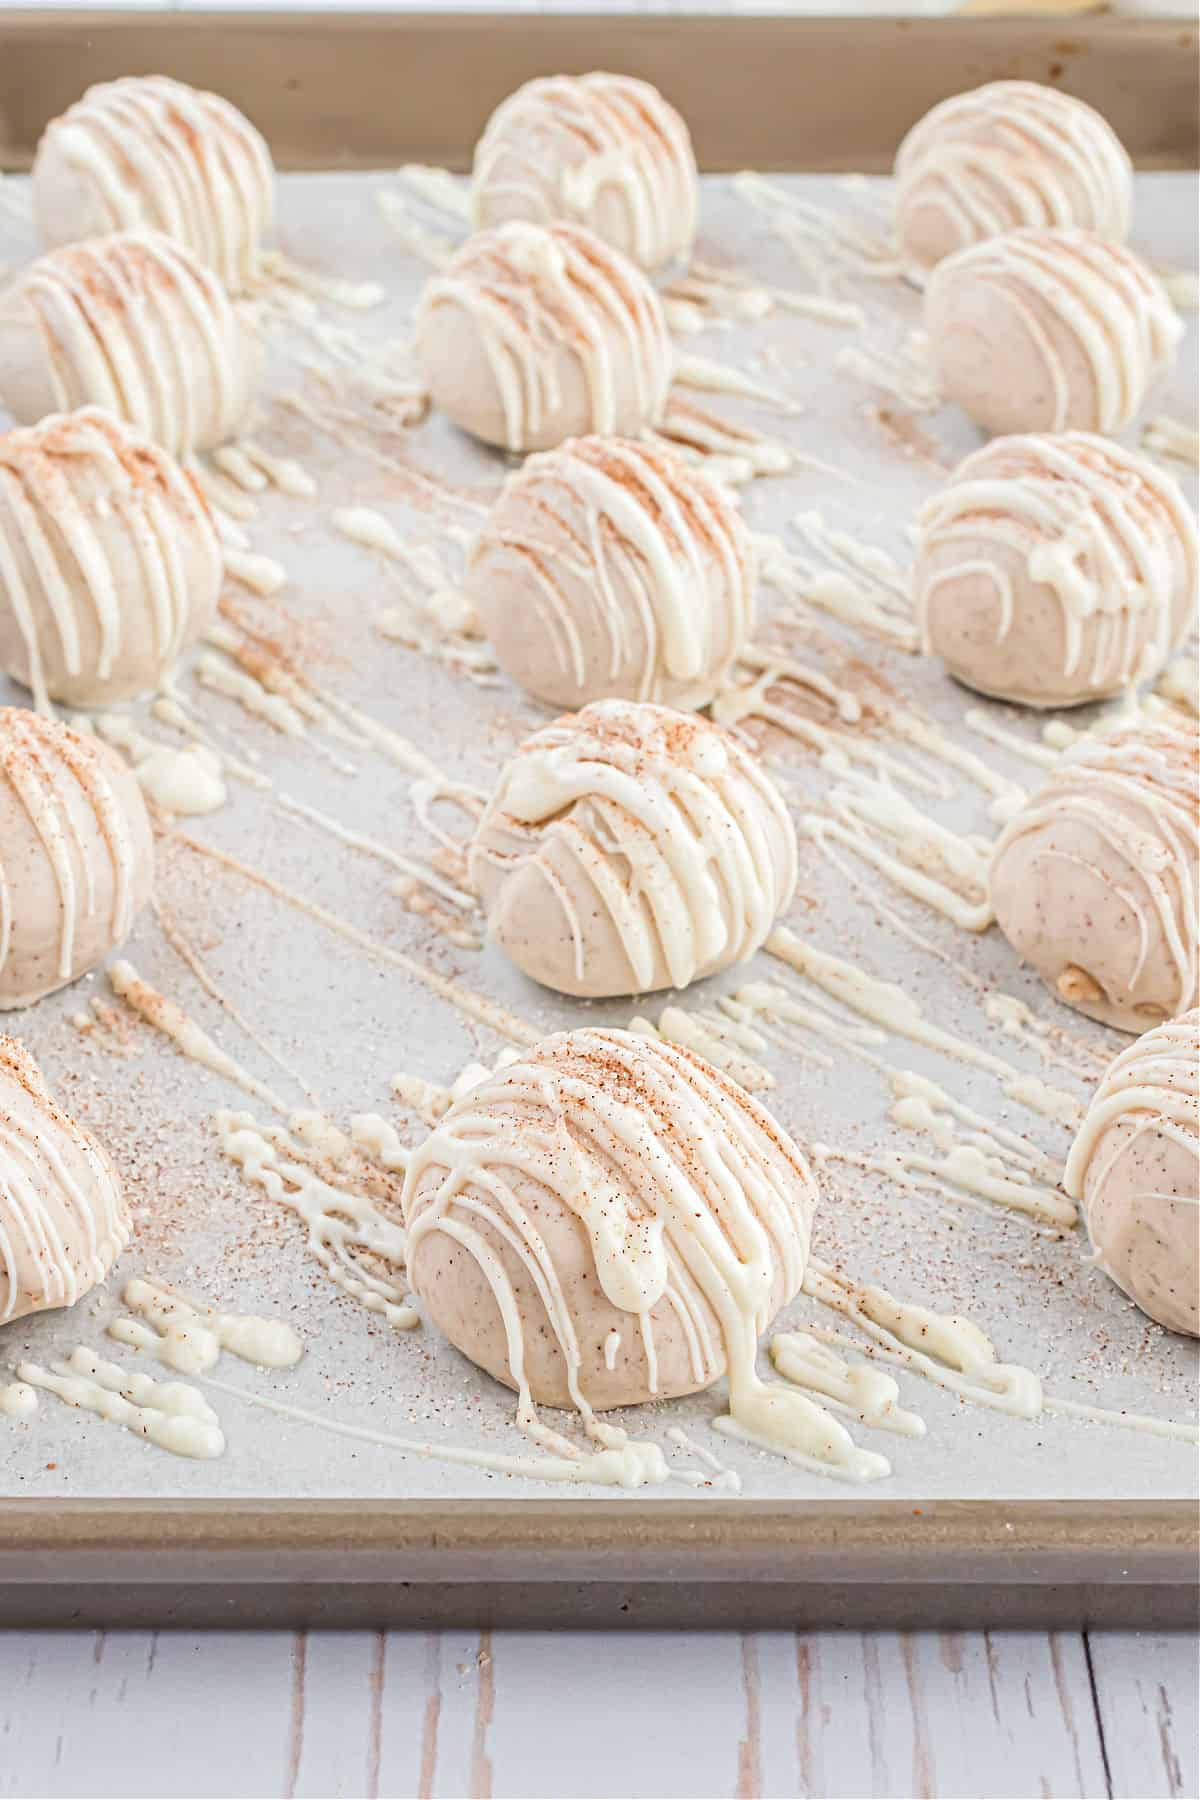 Cookie dough truffles dipped in white chocolate on a parchment paper lined cookie sheet.